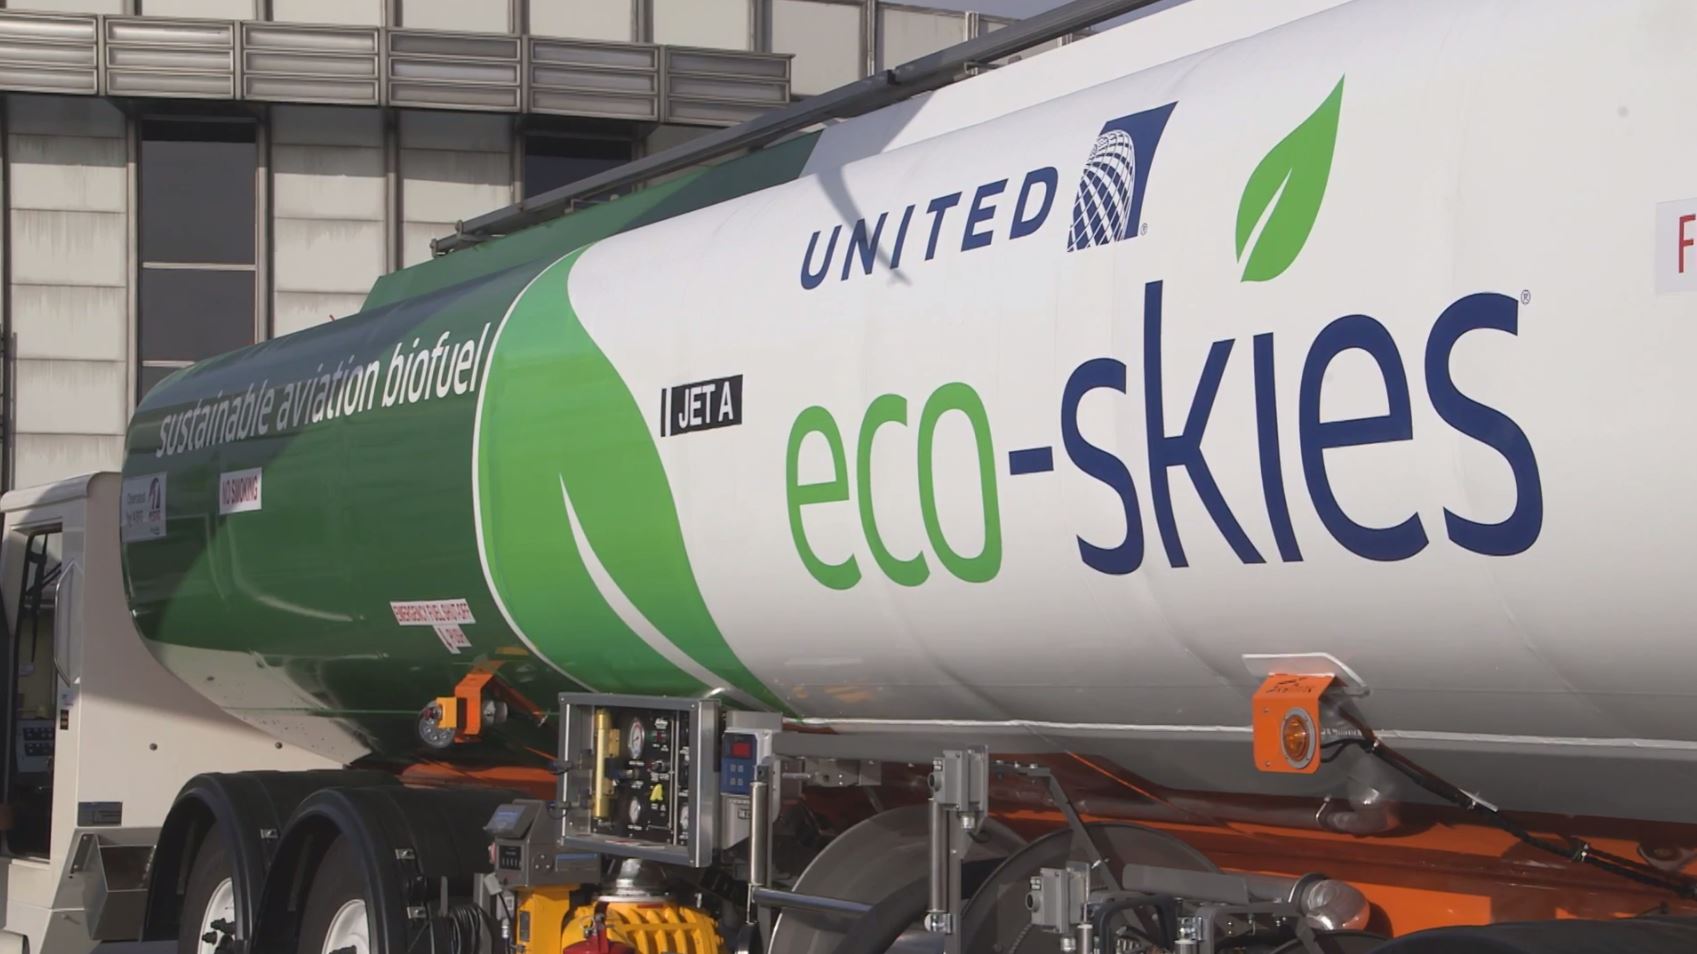 United – Biofuel Inaugural Event at LAX